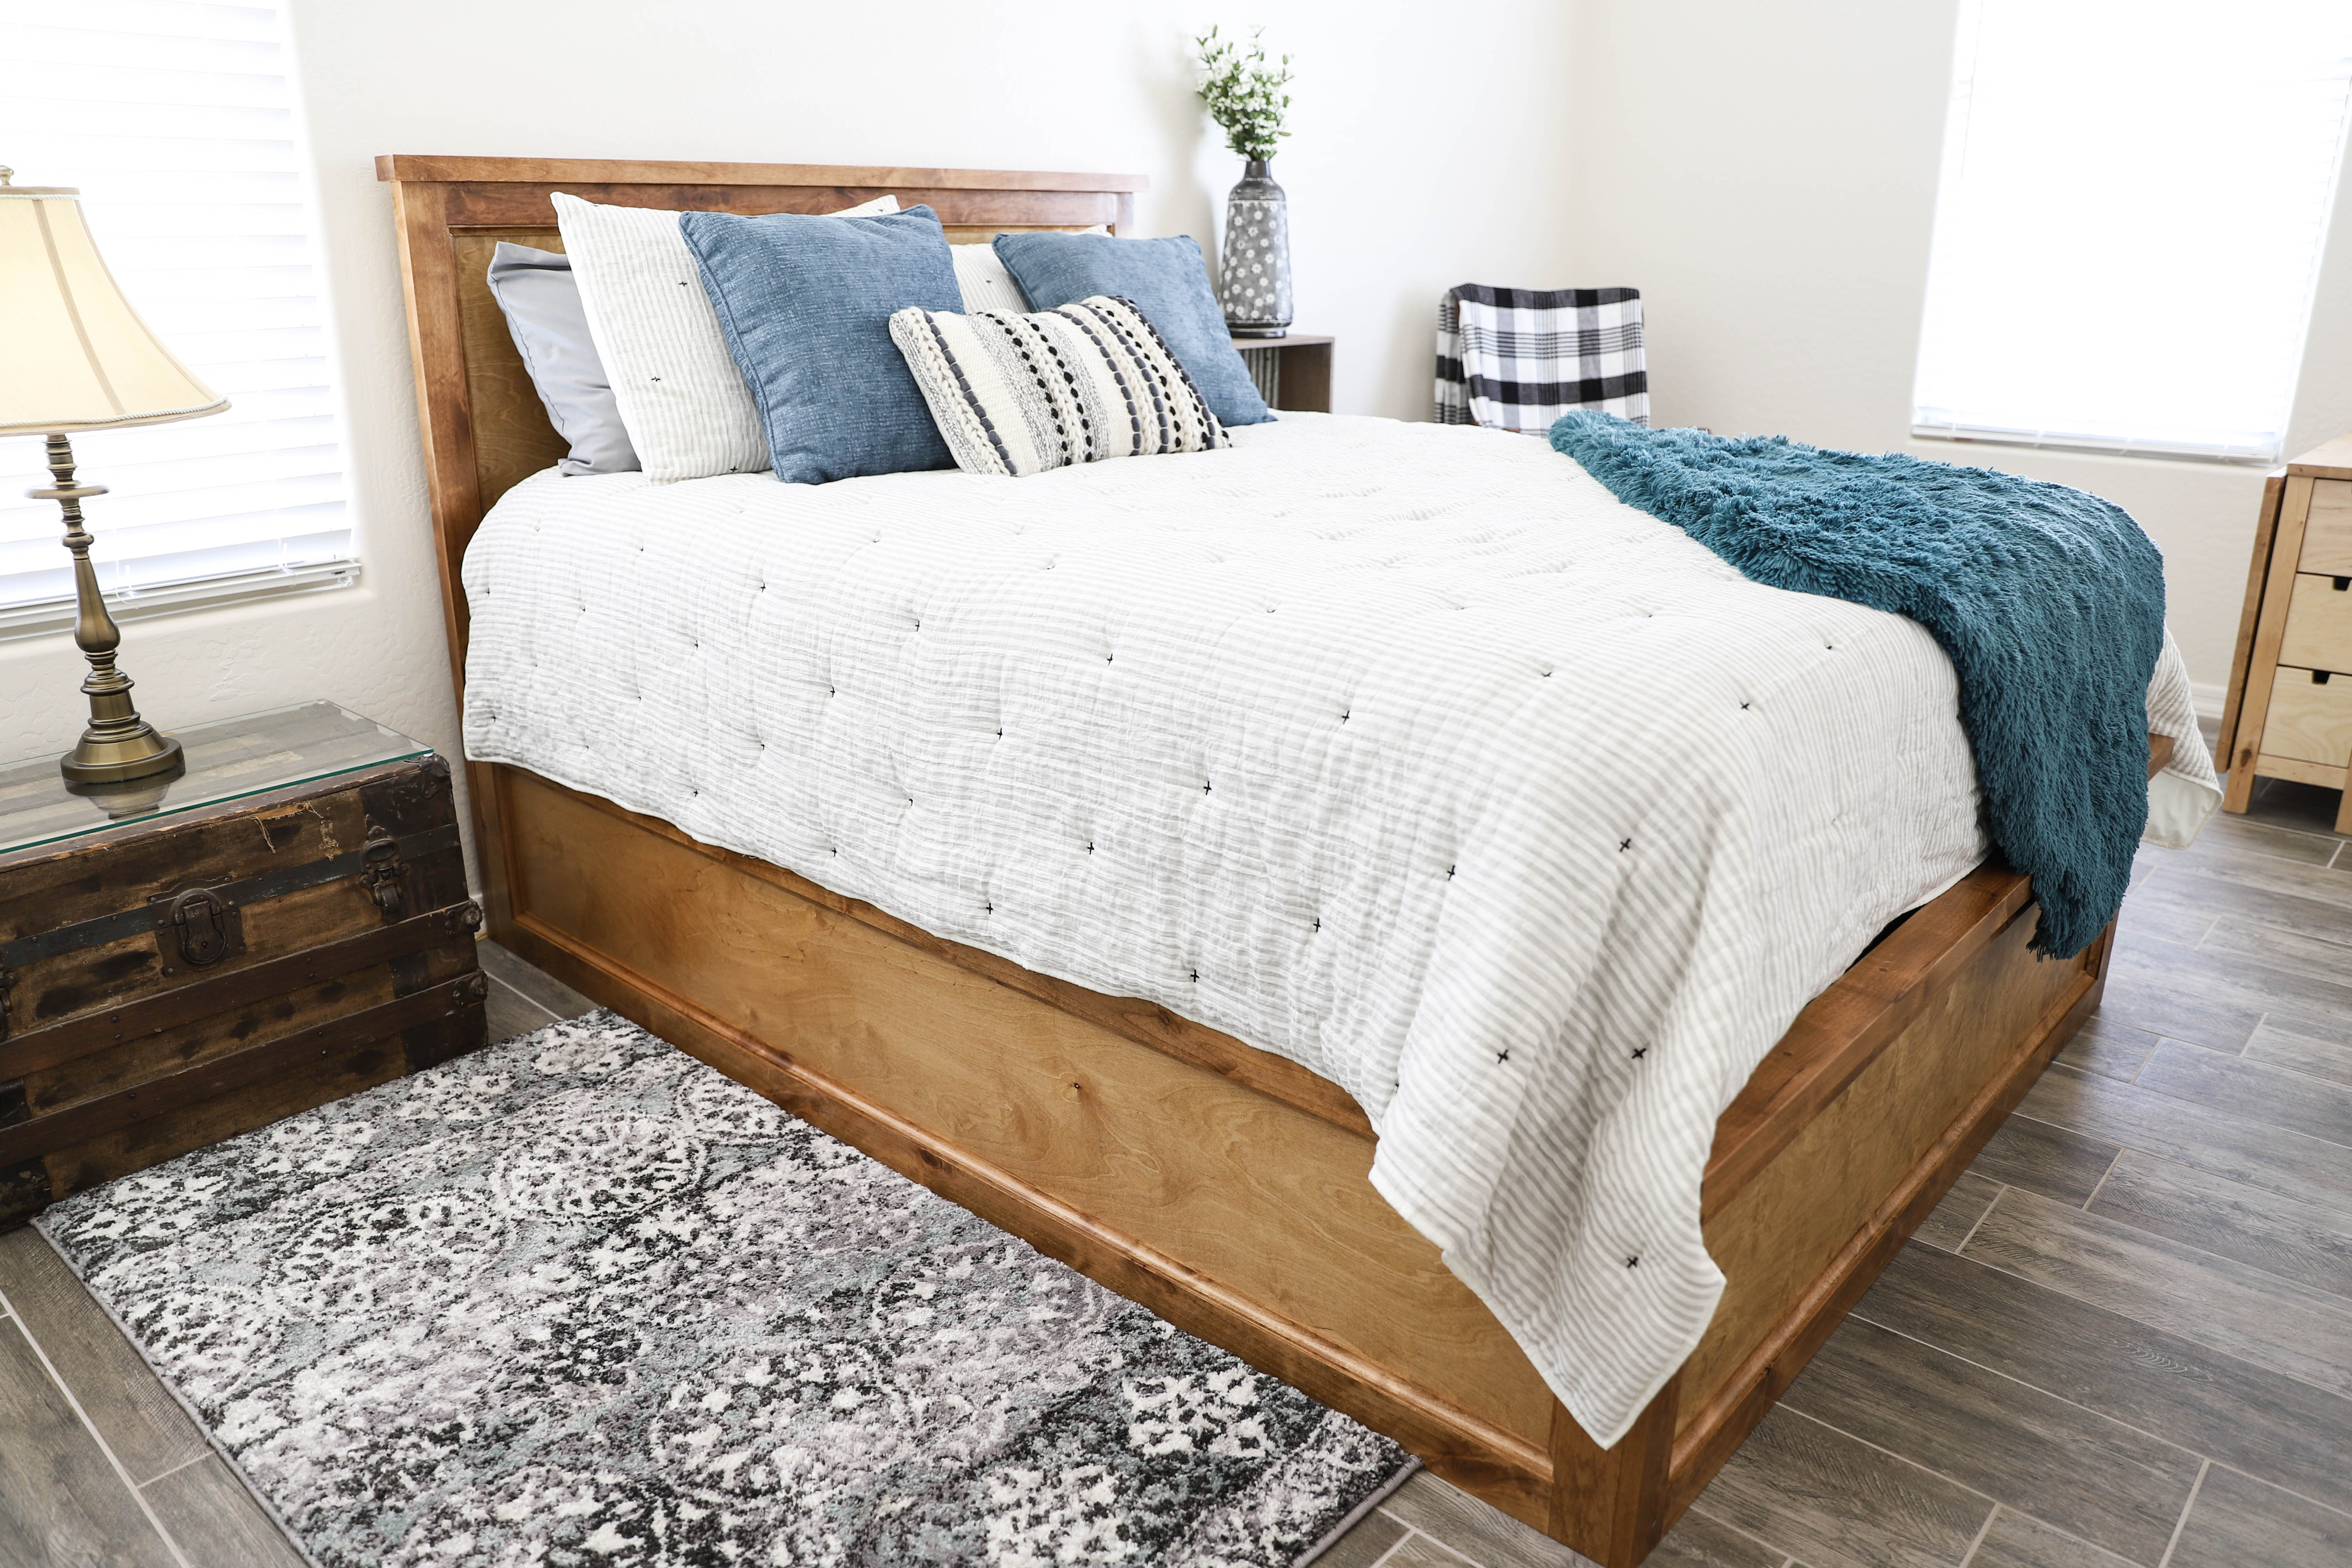 How To Build A Queen Size Storage Bed, Building A Bed Frame With Storage